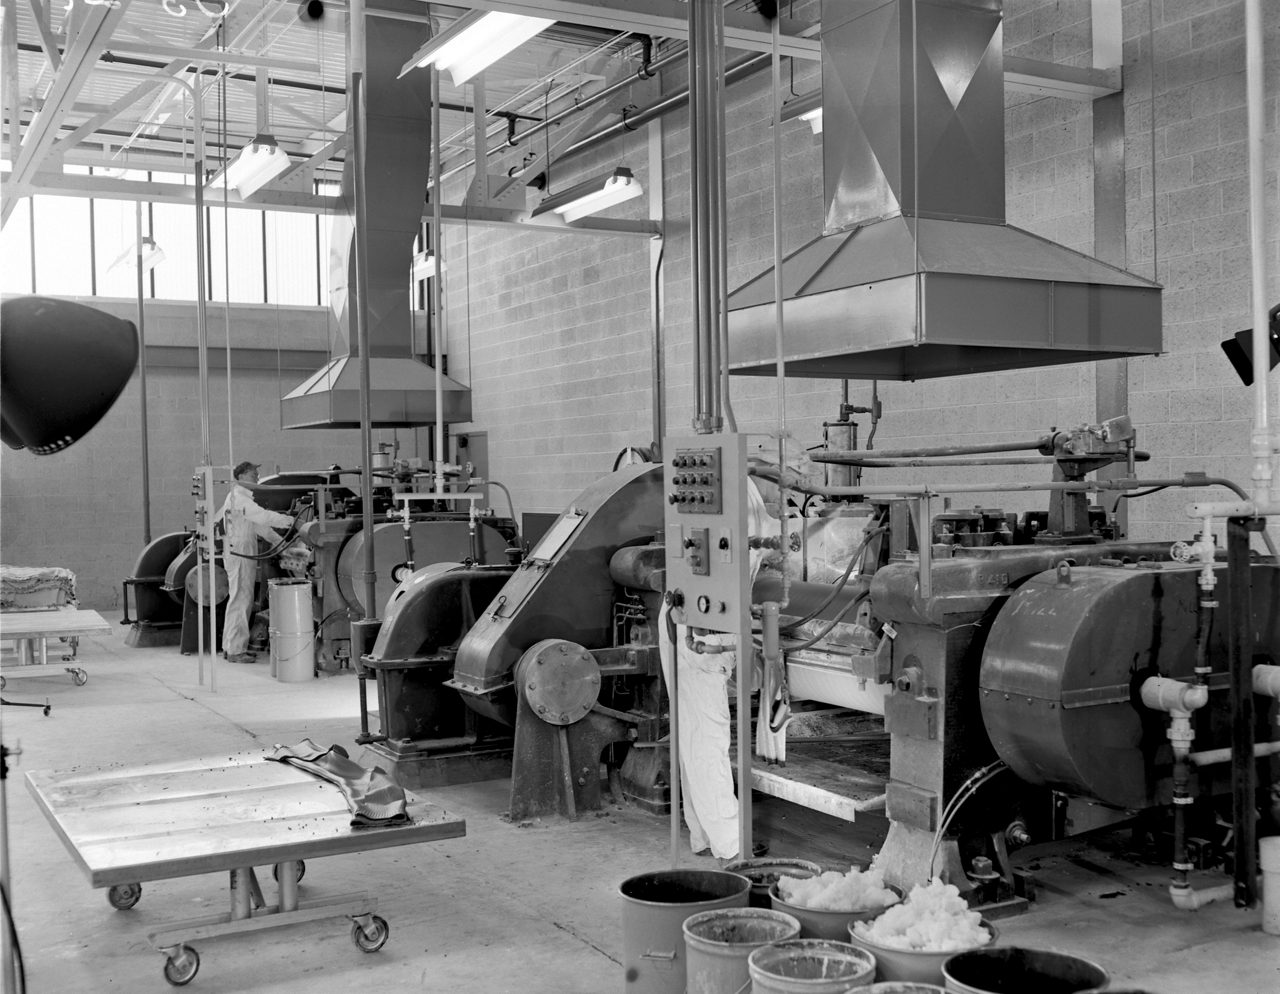 Rolling mills in the Silastic Building at the Midland Plant roll out sheets of Silastic silicone rubber in early 1953 photo by Jim Dion. Photo used in 50th Anniversary Book. Production areas / Midland Plant, Michigan, USA,